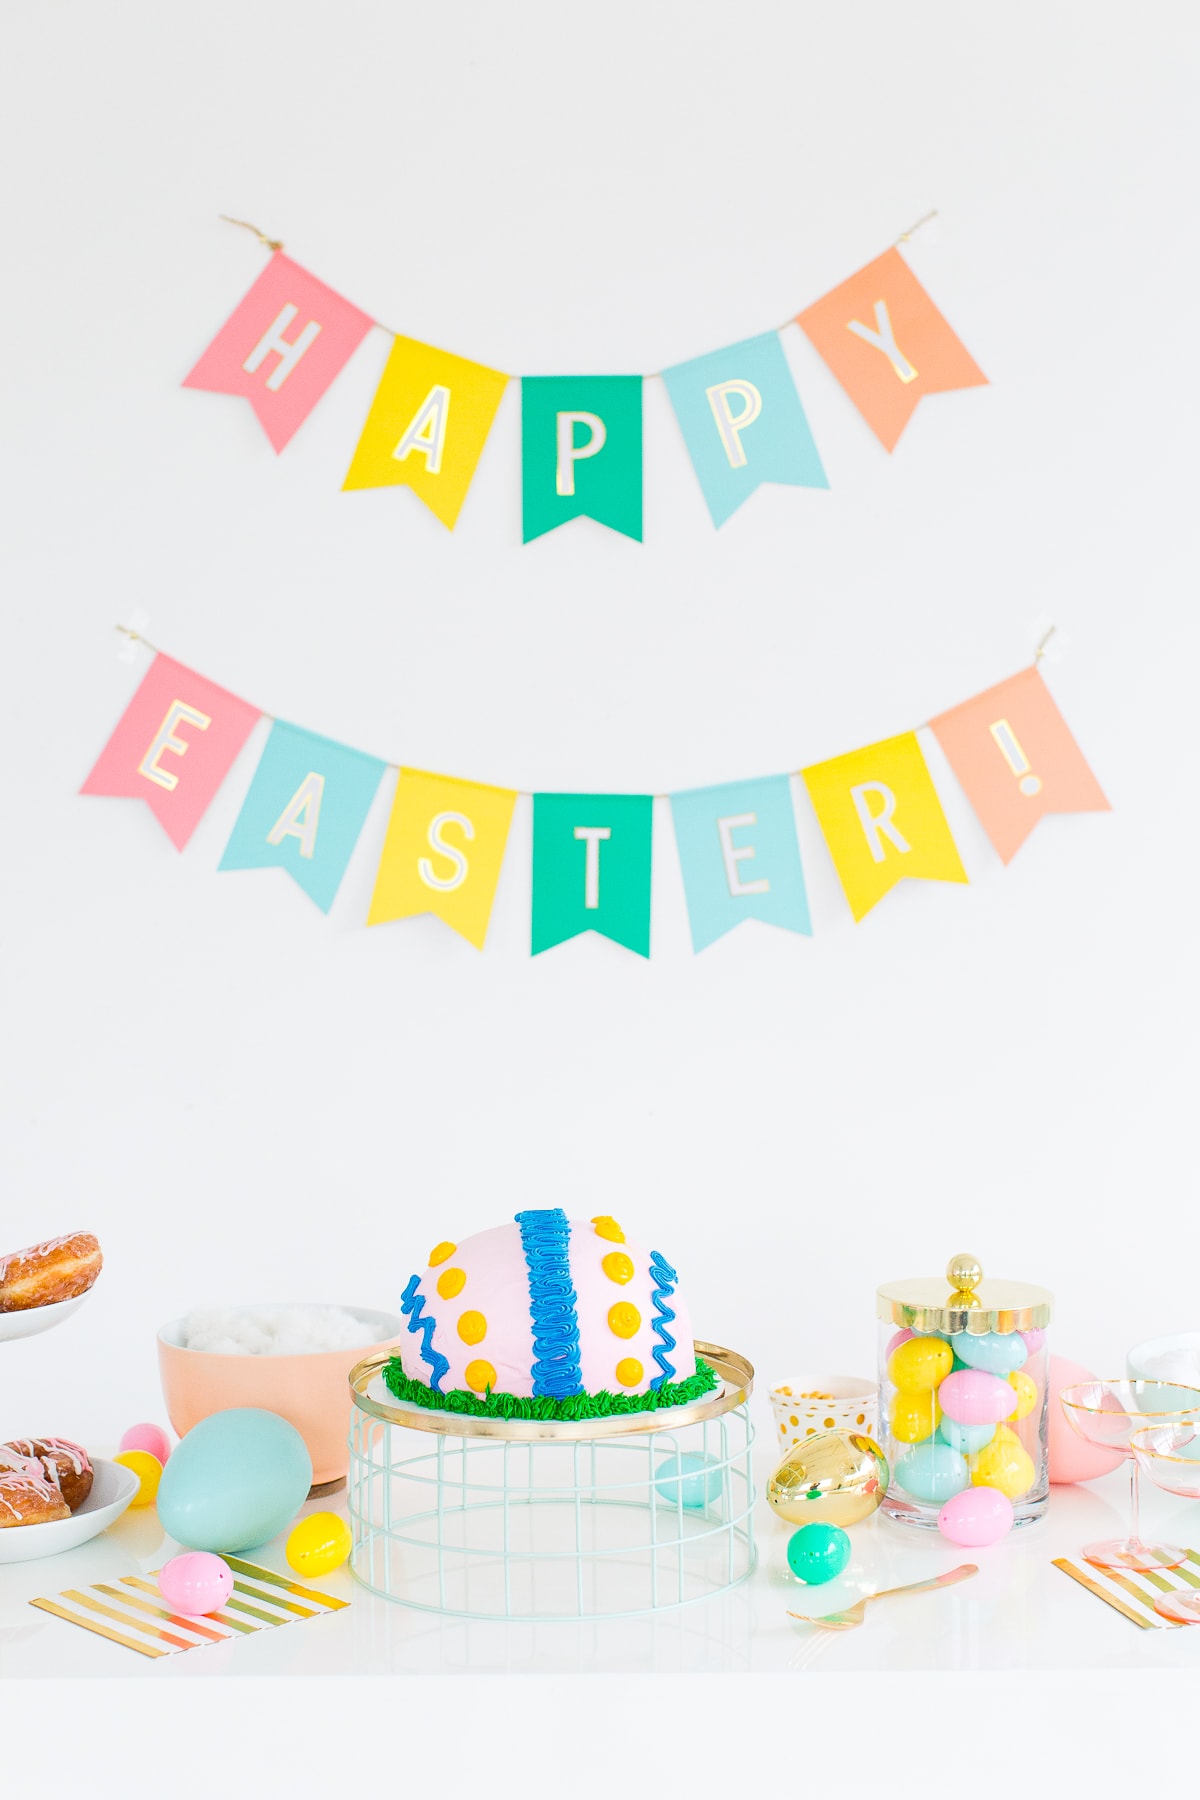 A playful Easter dessert table - sugar and cloth